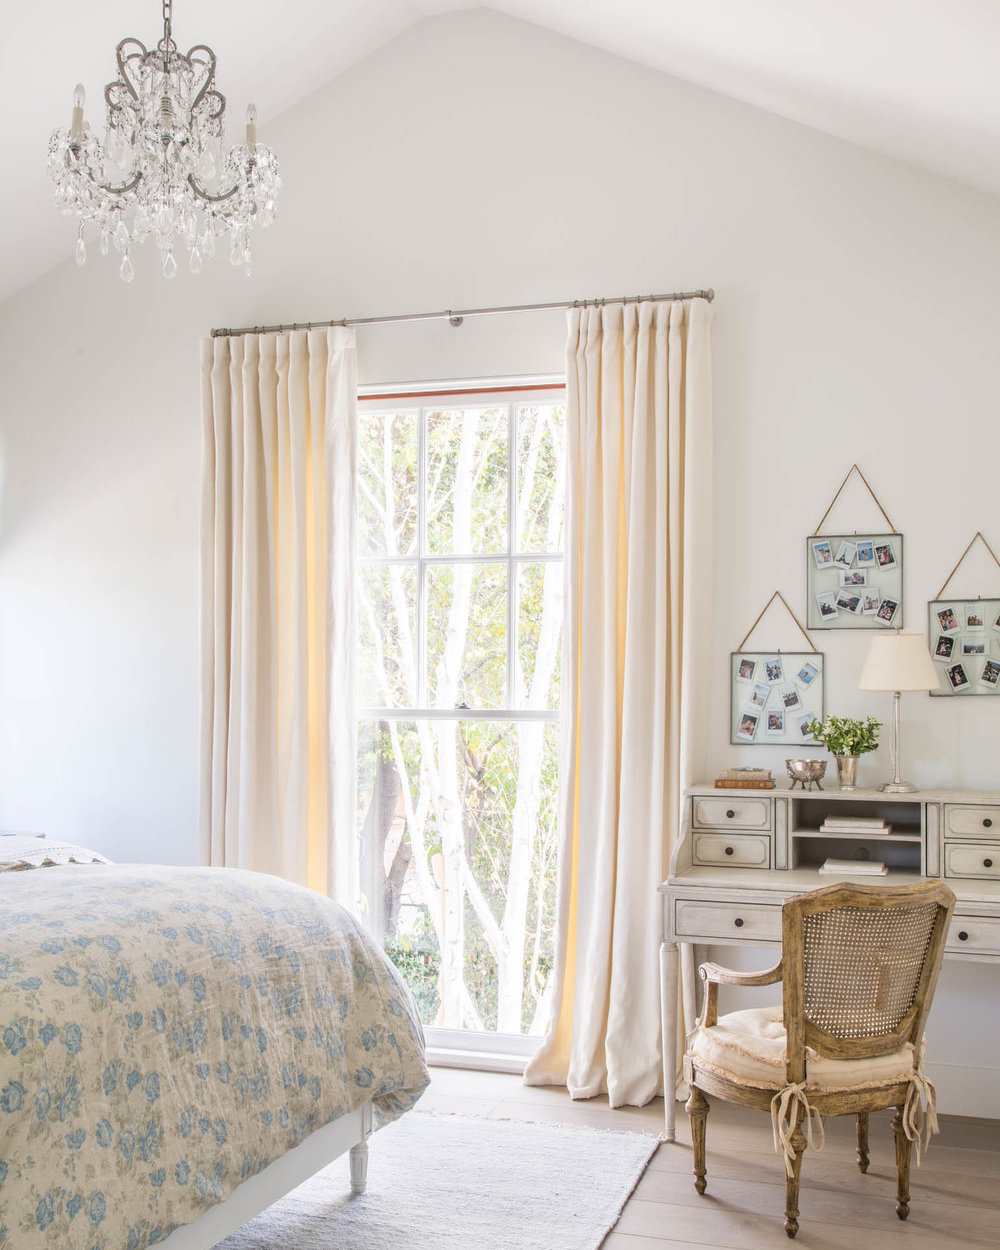 Décor Inspiration | A Californian Home Decorated in Elegant Neutrals